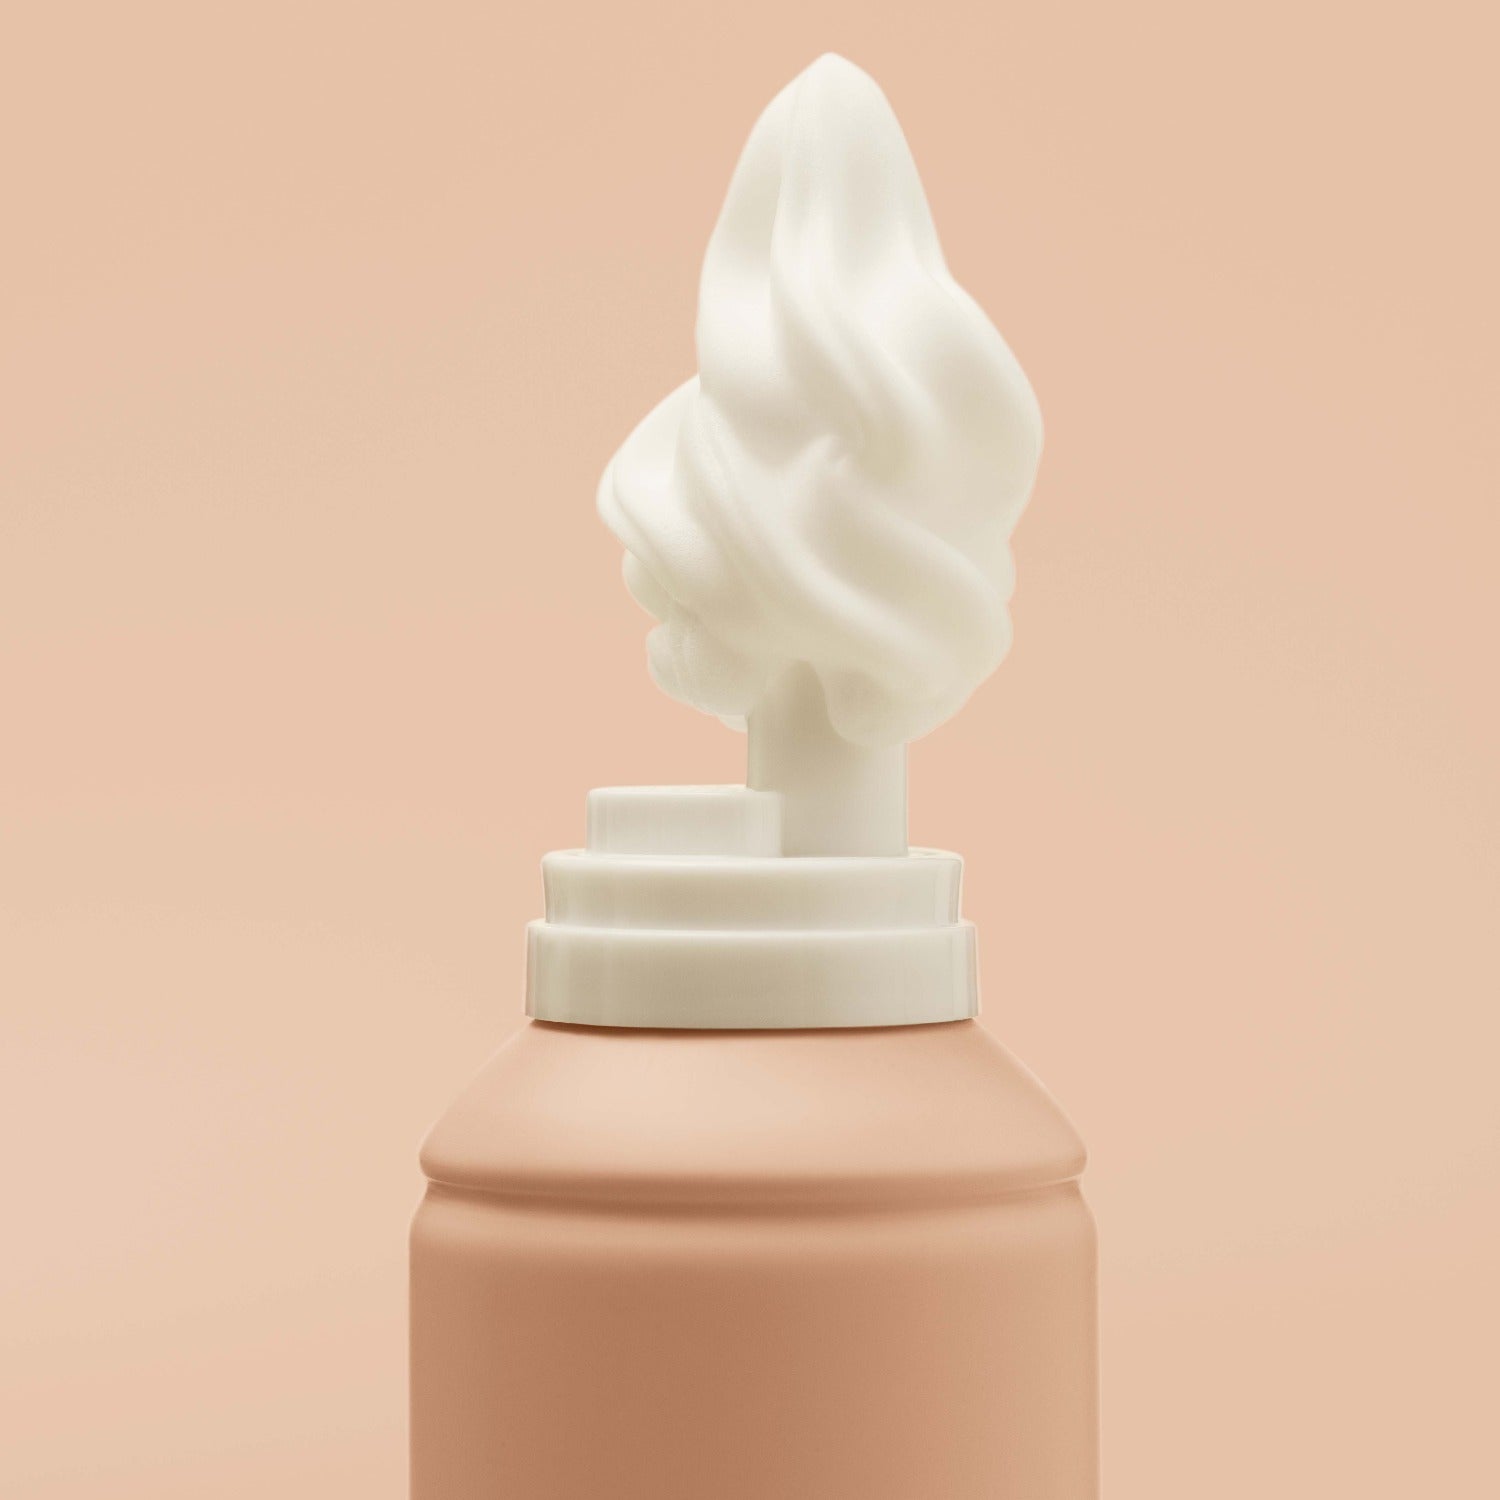 Close-up of foam coming off the nozzle of the coconut-scented Mecré moisturizing body wash bottle.